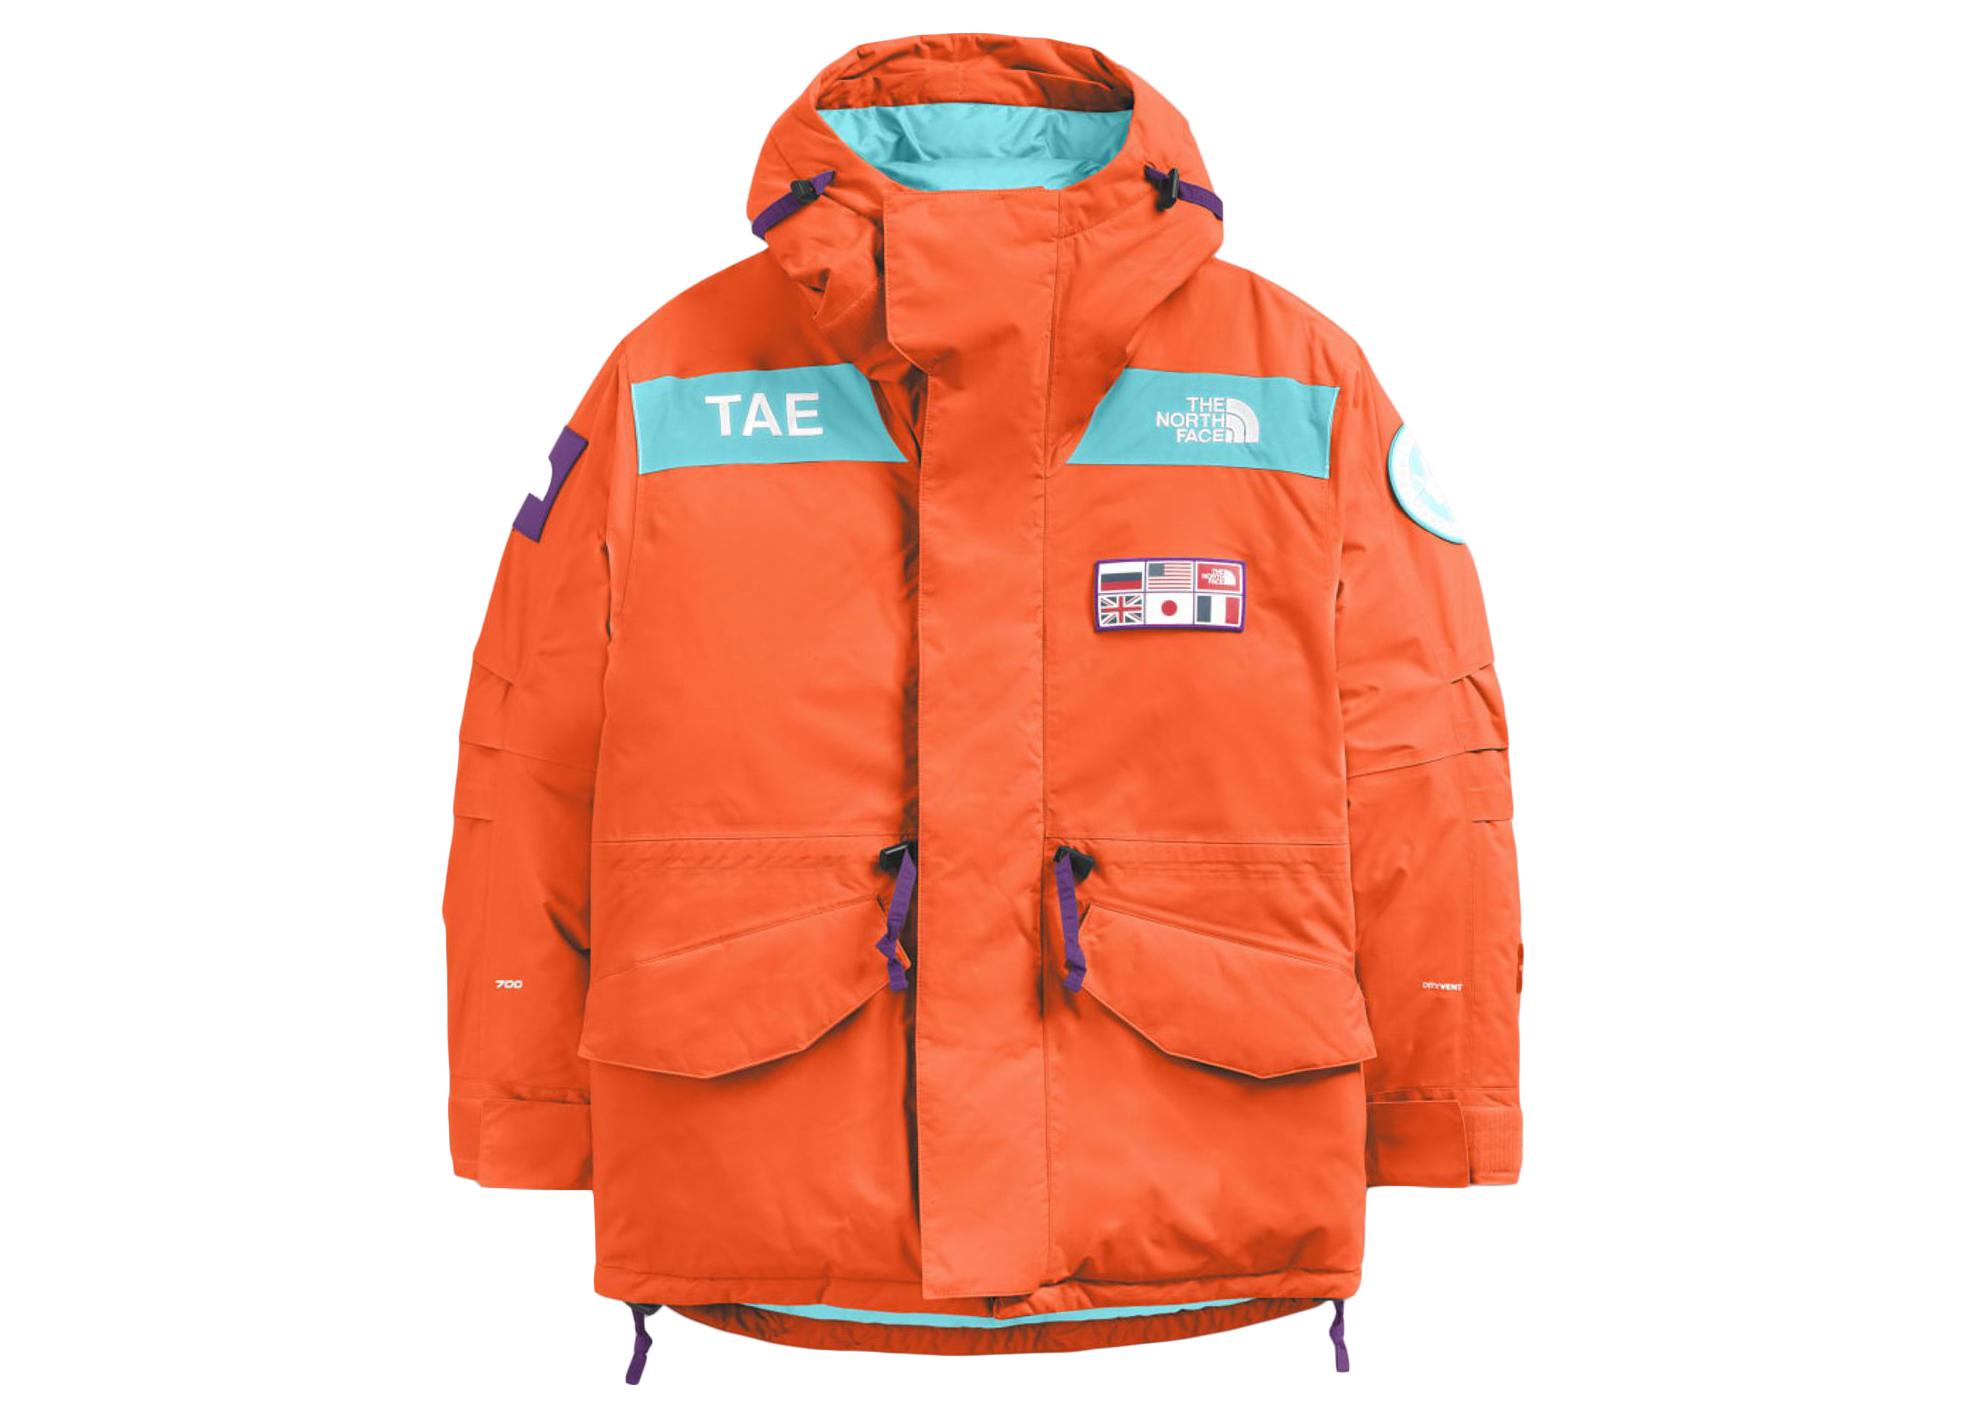 The North Face TAE Trans-Antarctica Expedition 700-Down Parka